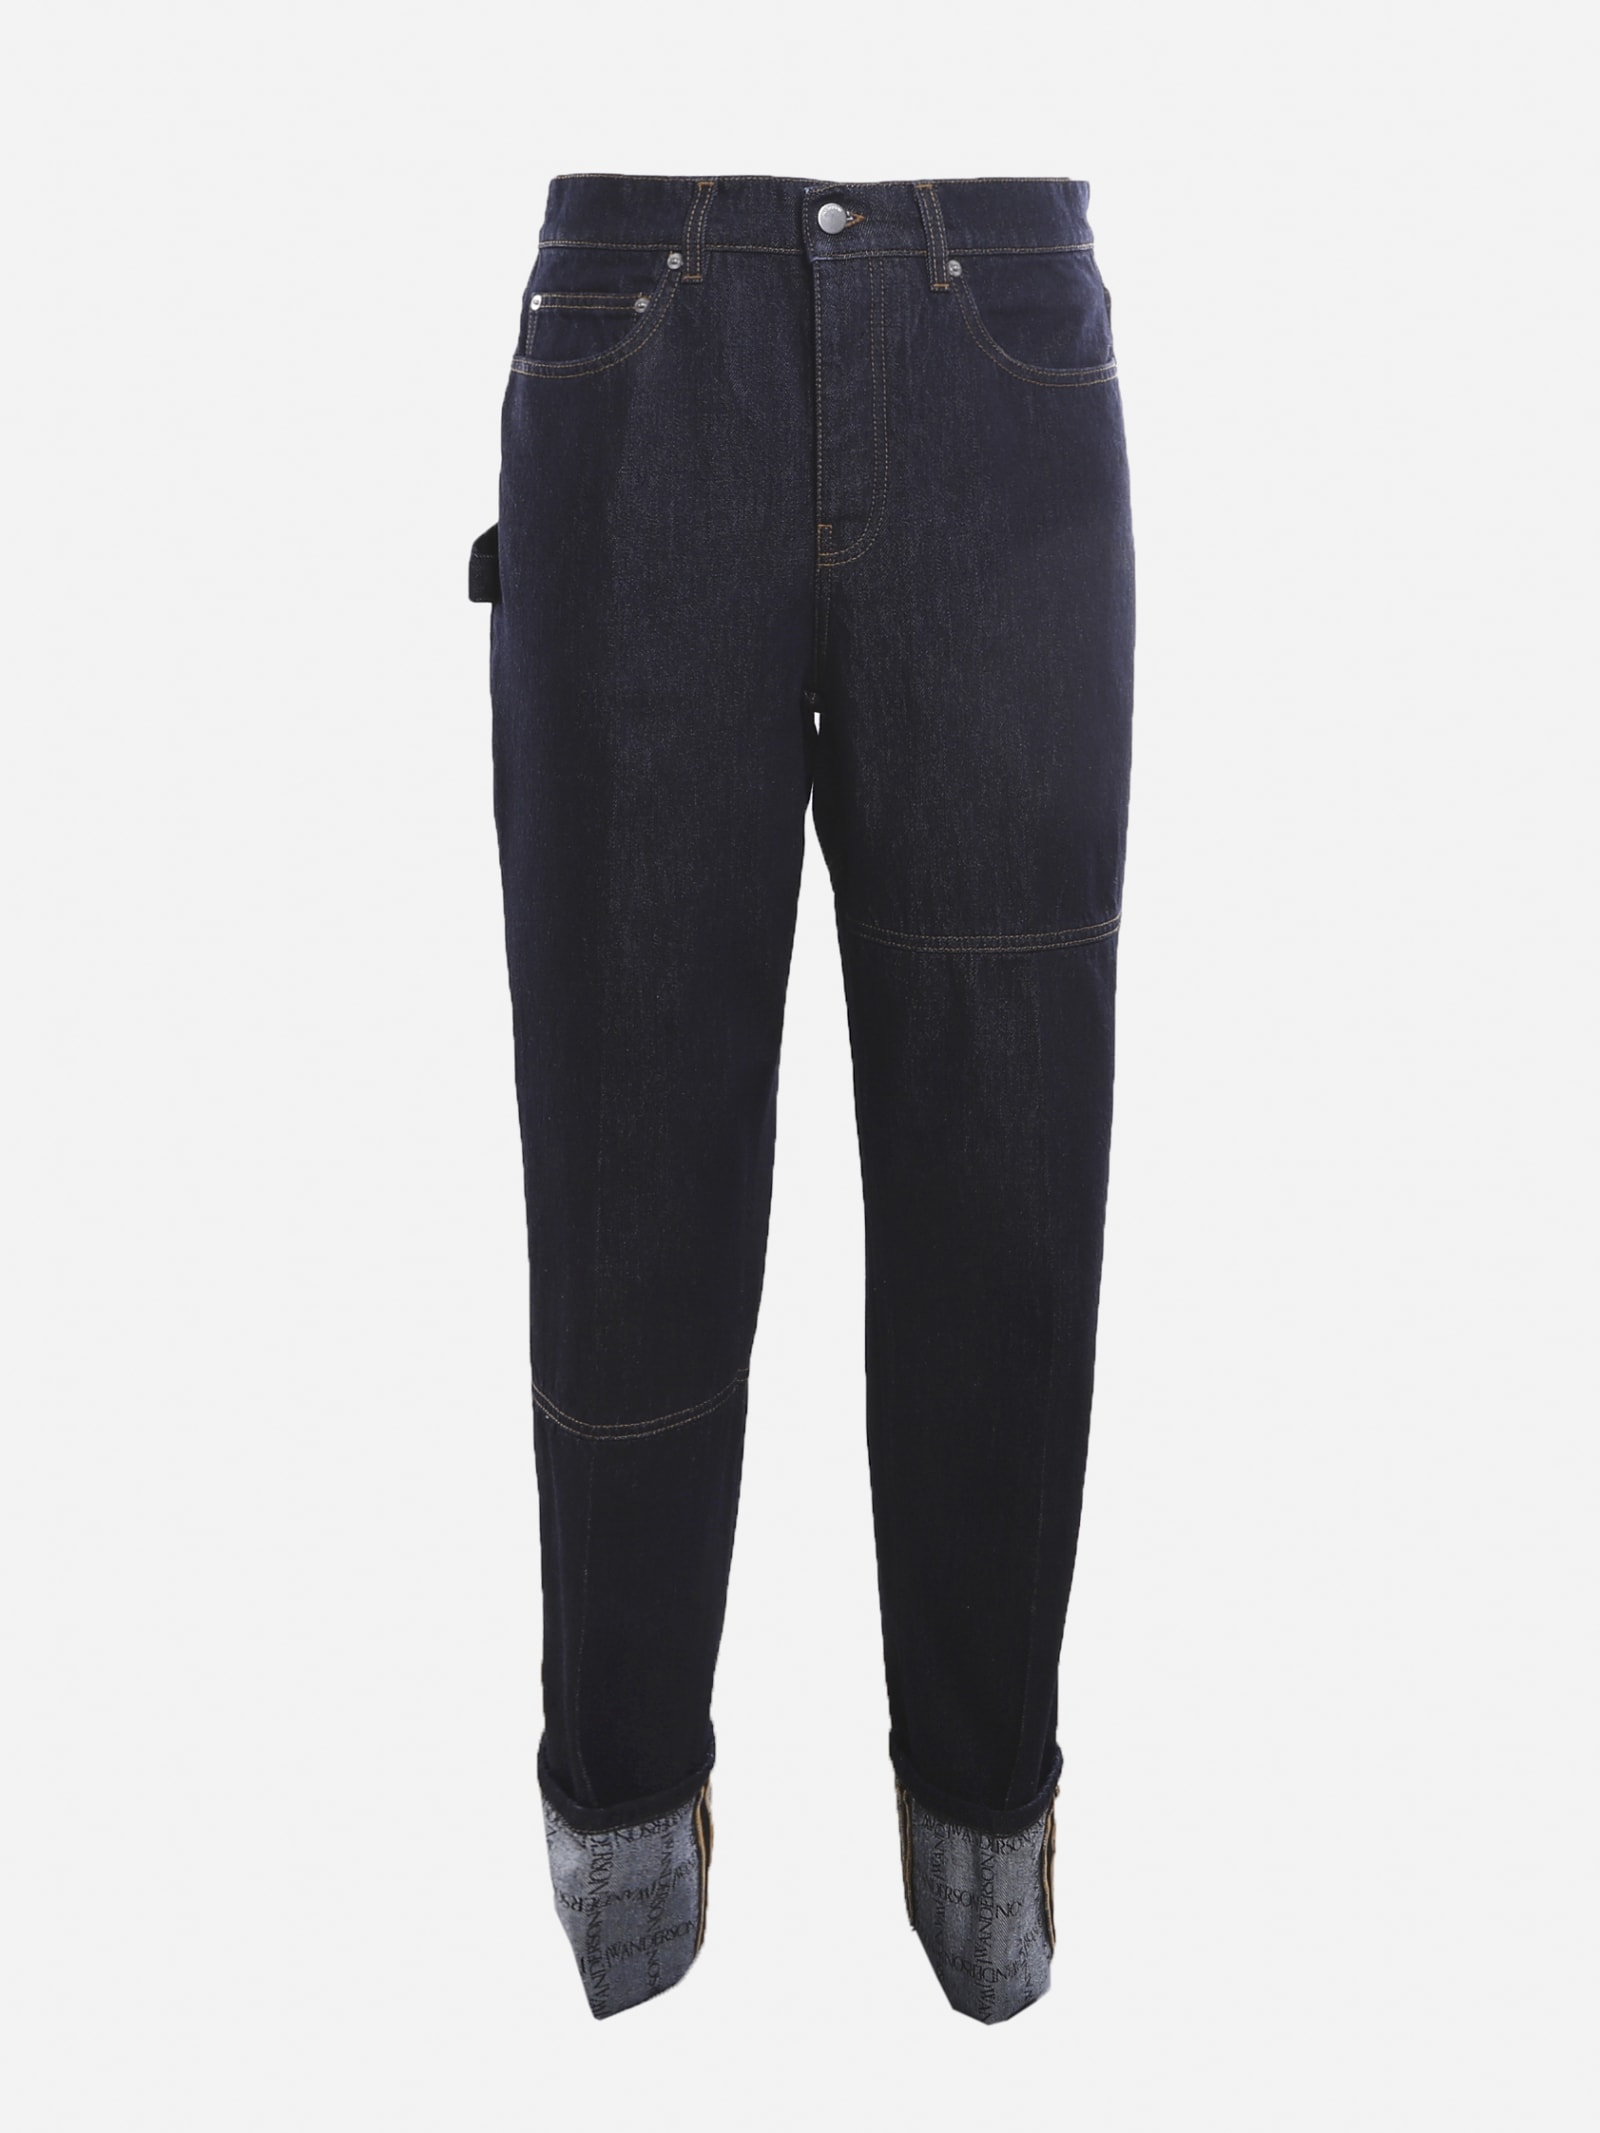 J.W. Anderson Cotton Denim Jeans With Cuffs On The Bottom